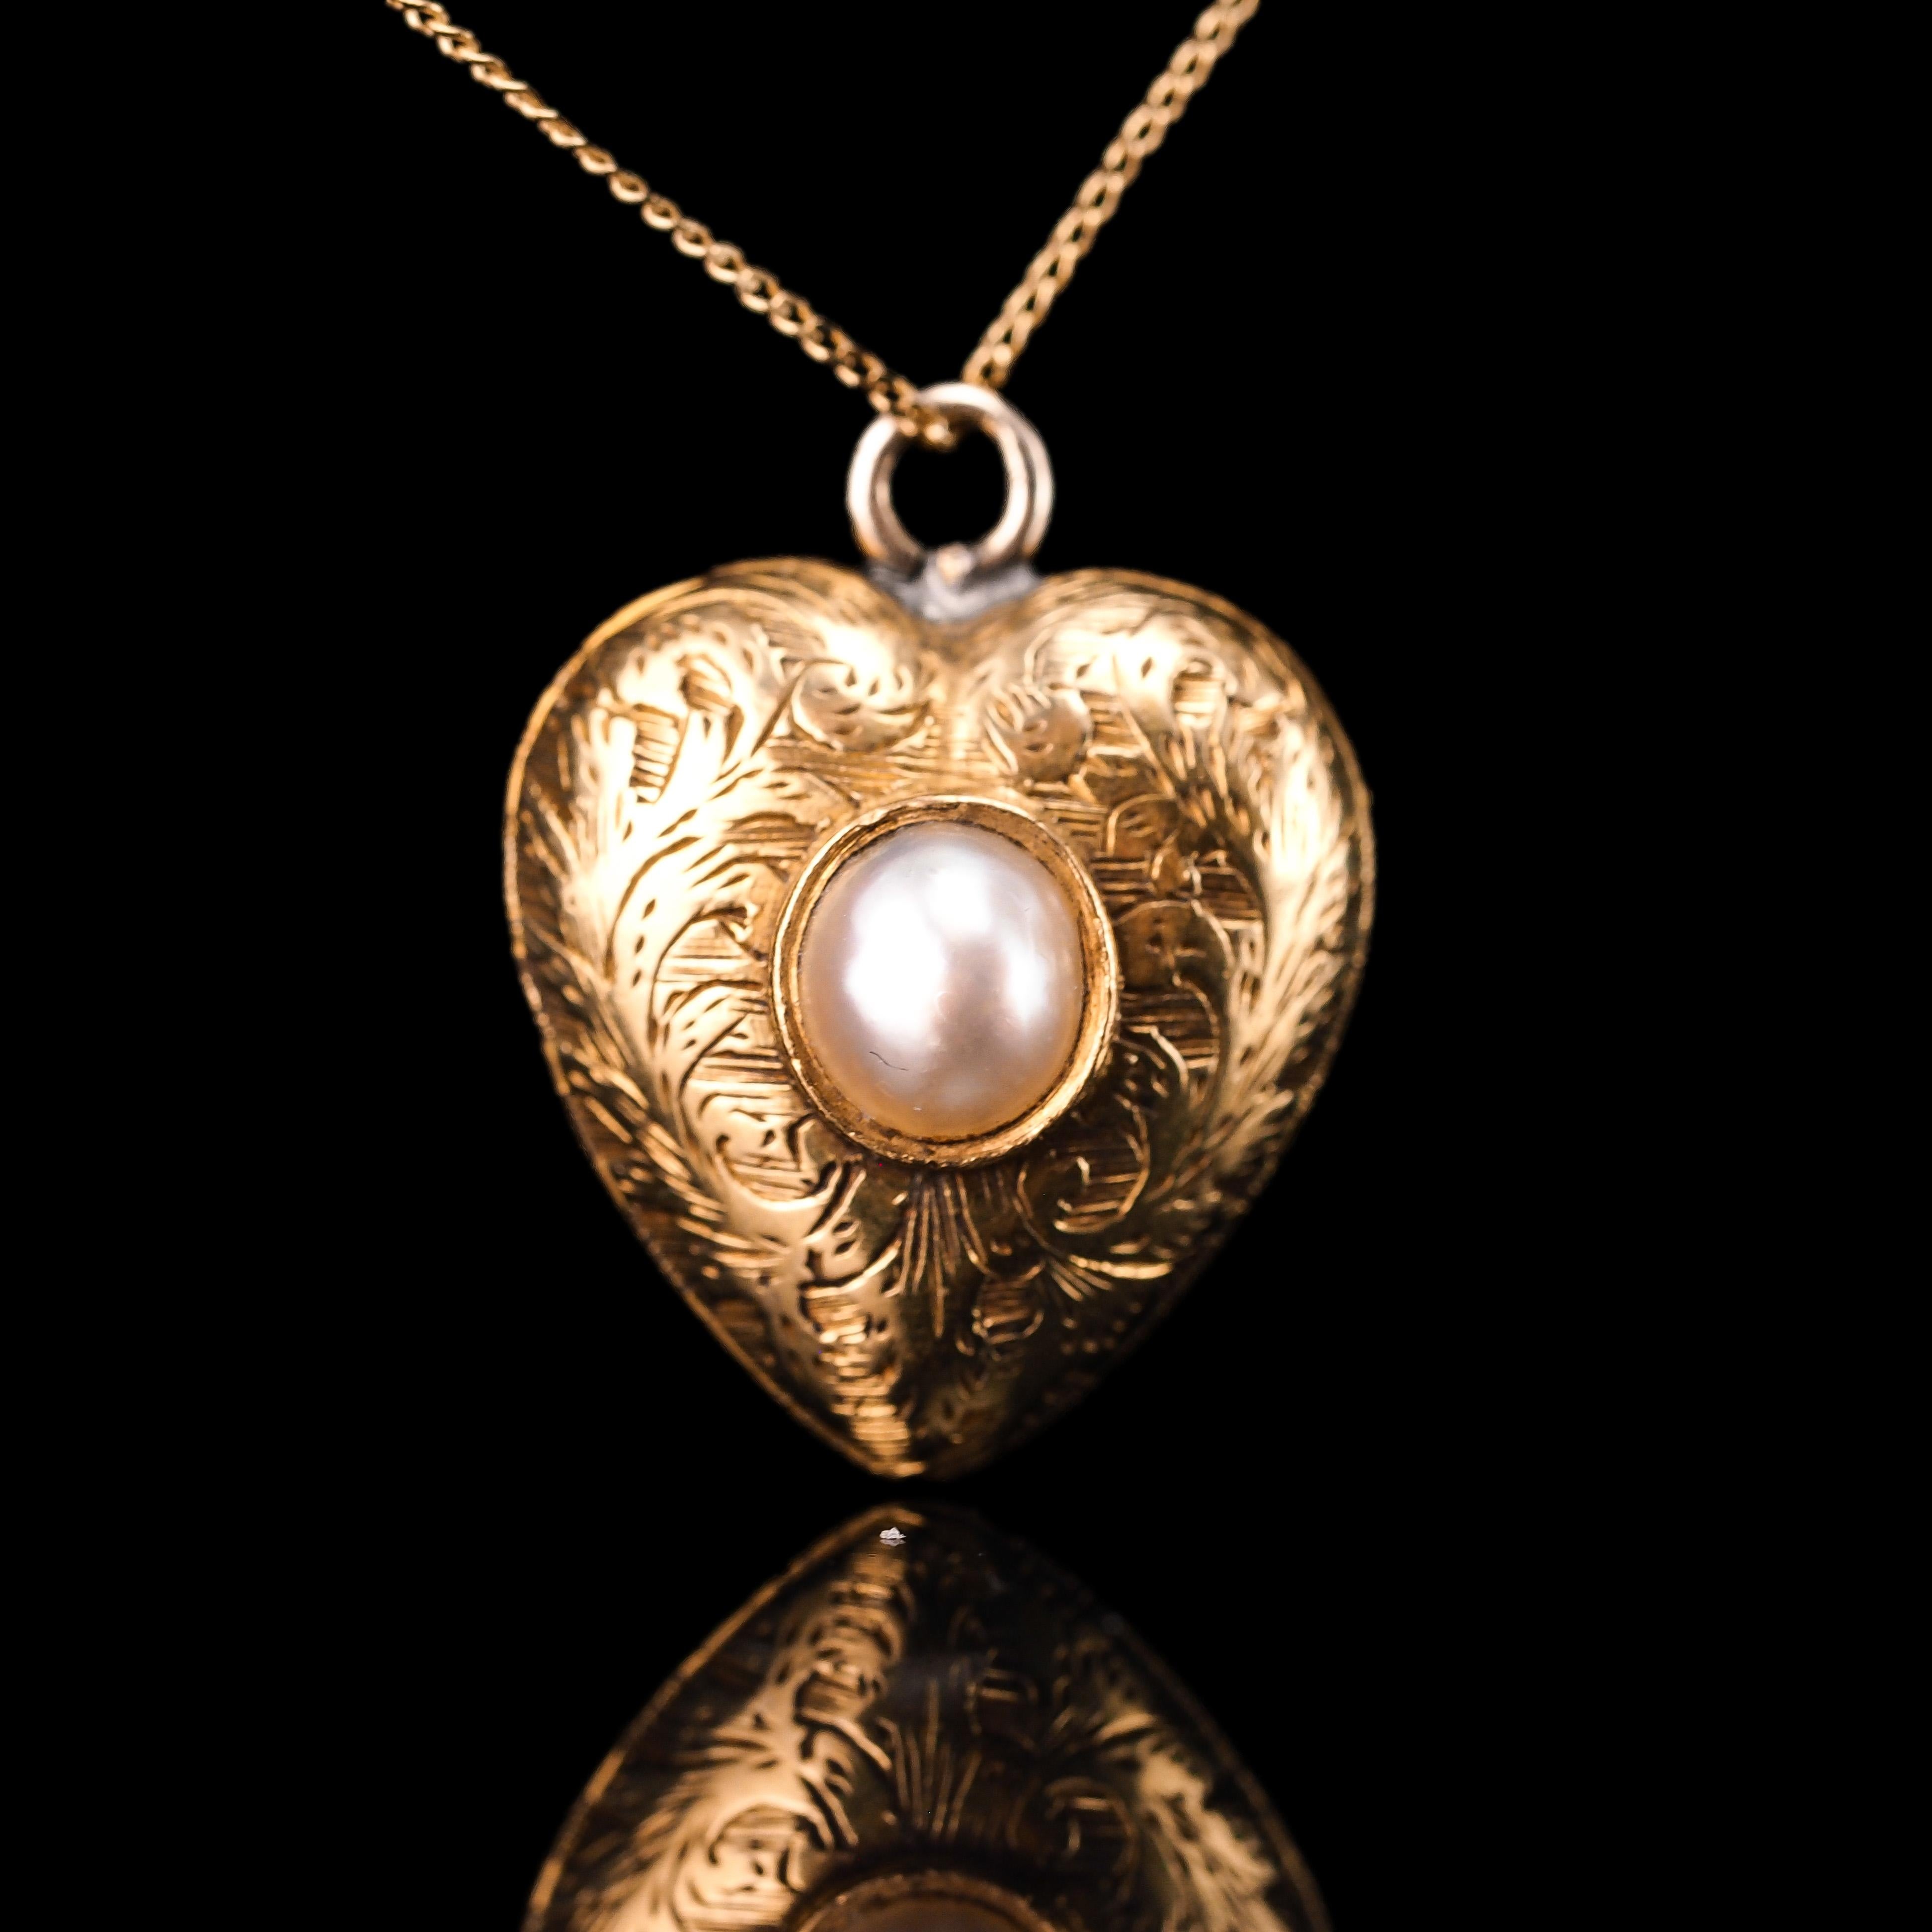 Antique 18K Gold Heart Charm Pendant Necklace with Pearl - Victorian c.1890 8